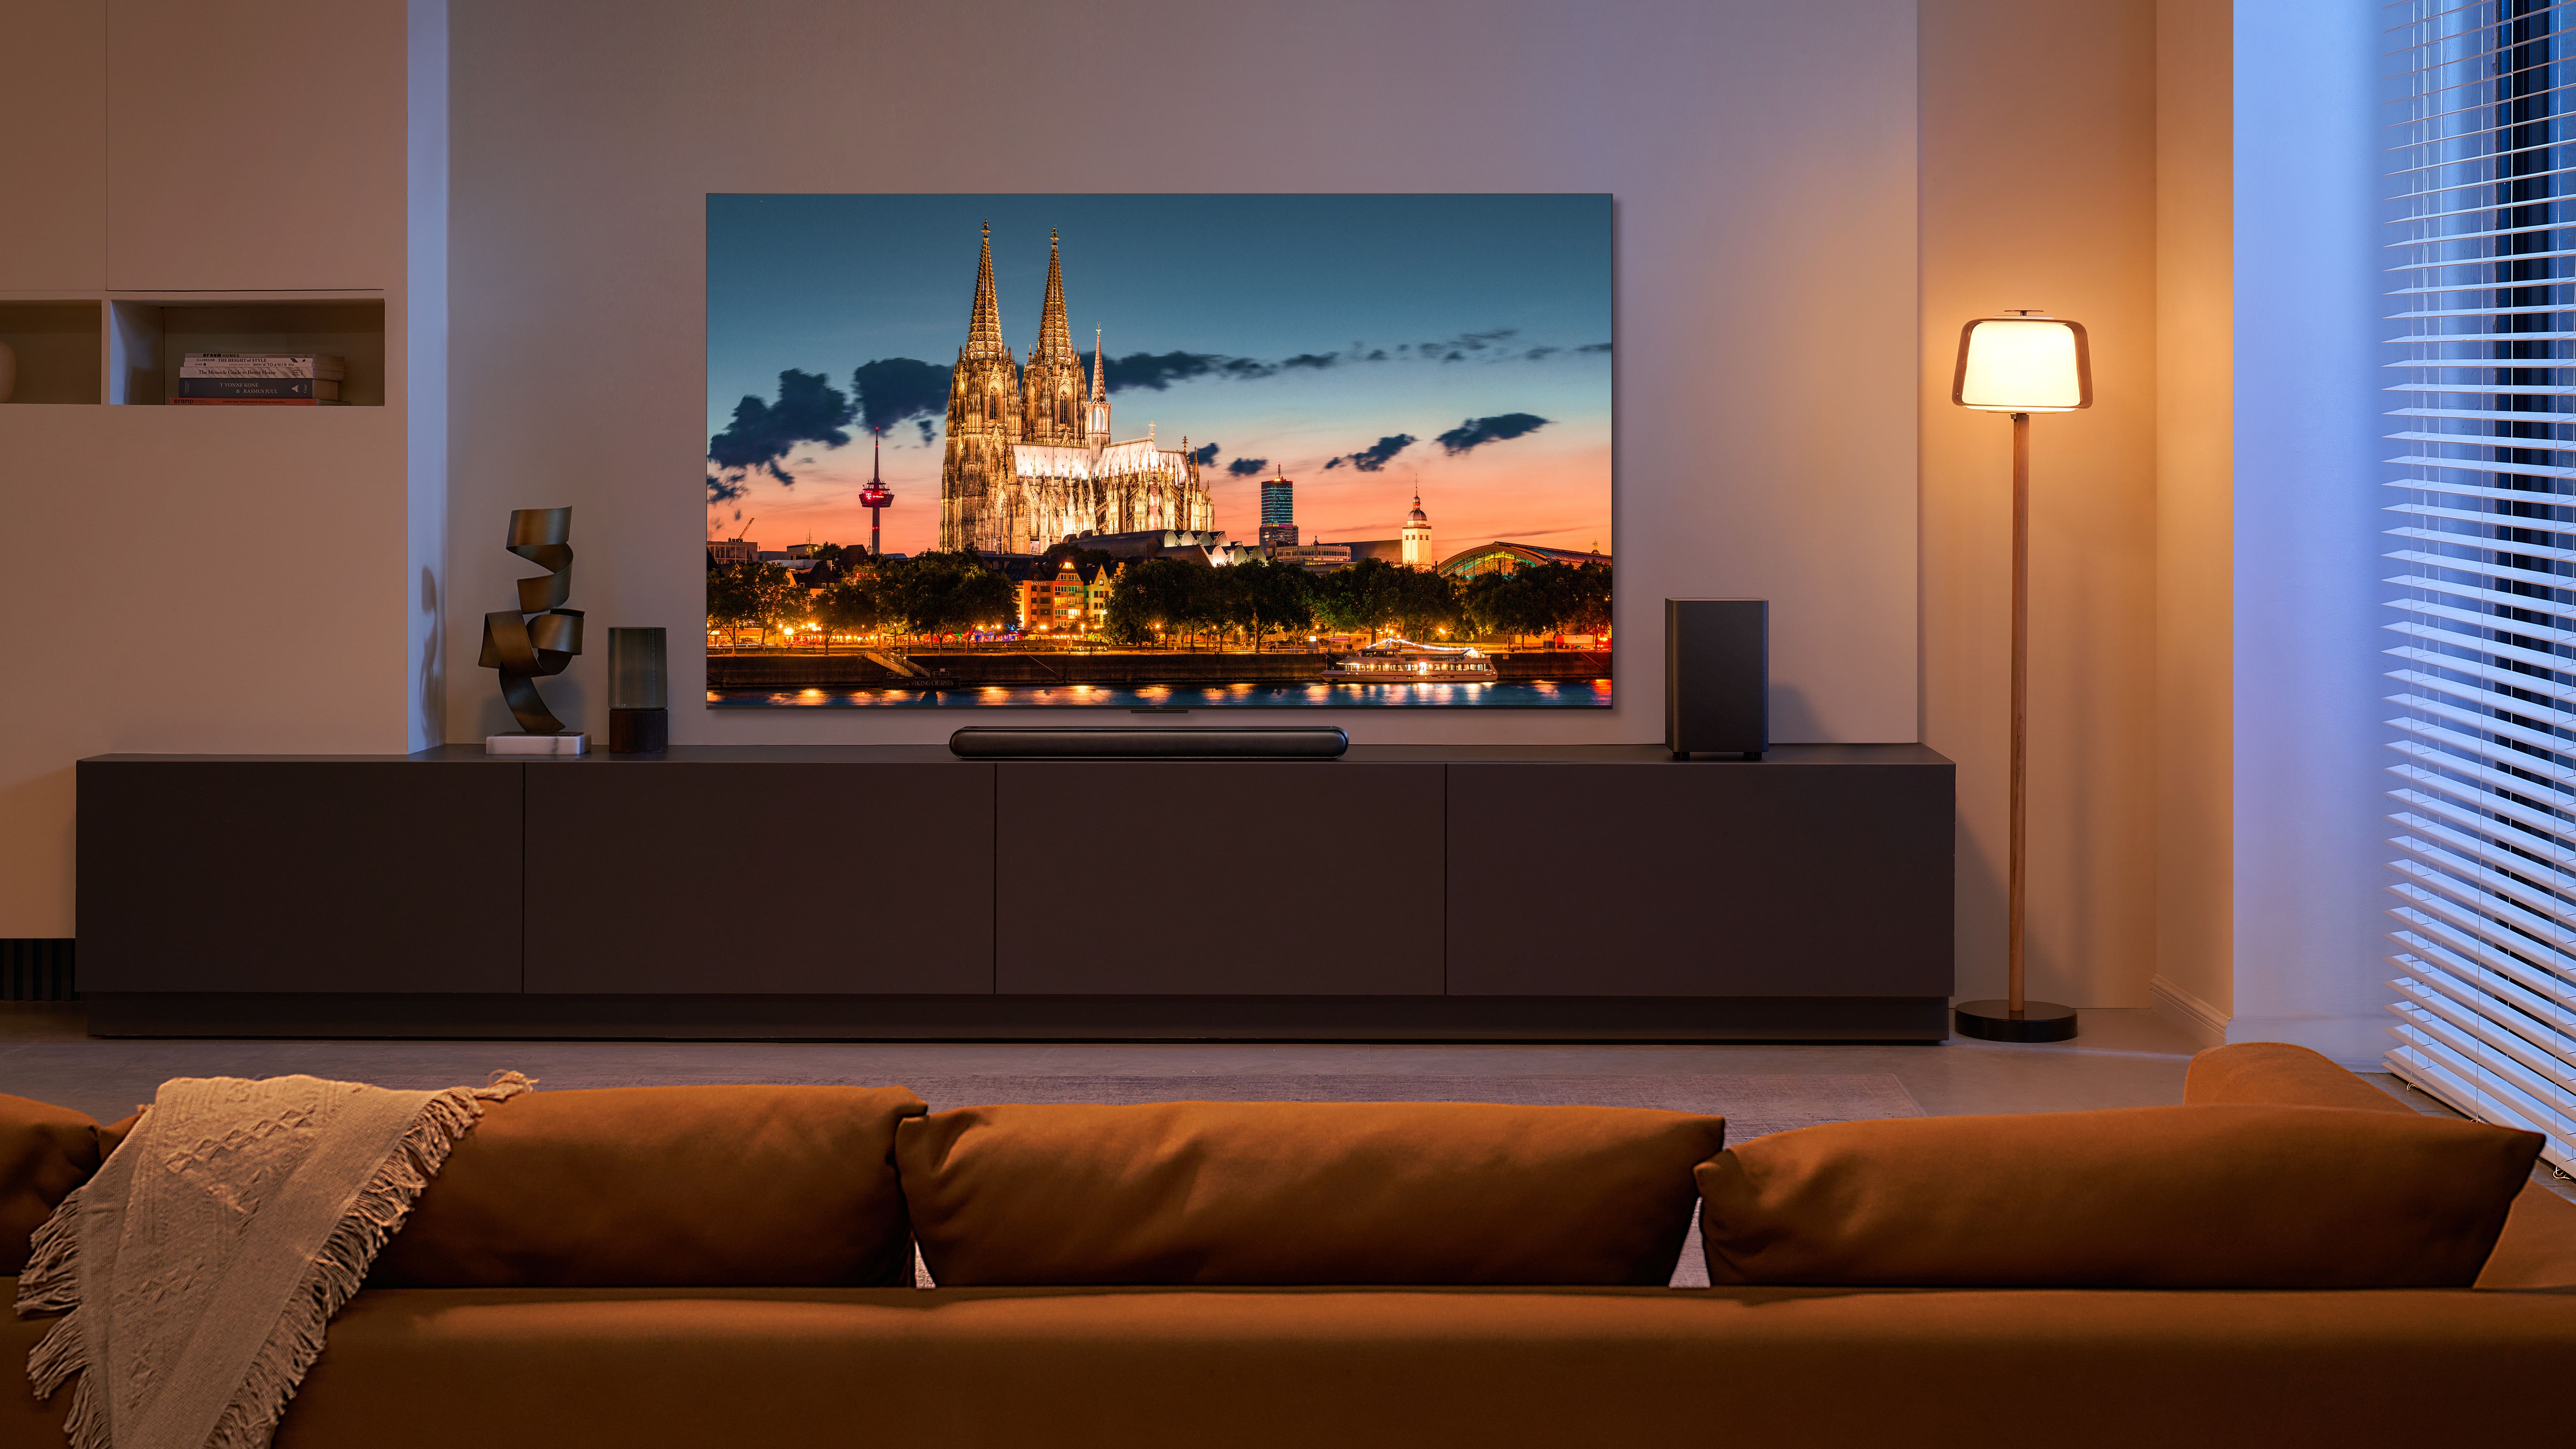 C955 TCL TV mounted on living room wall